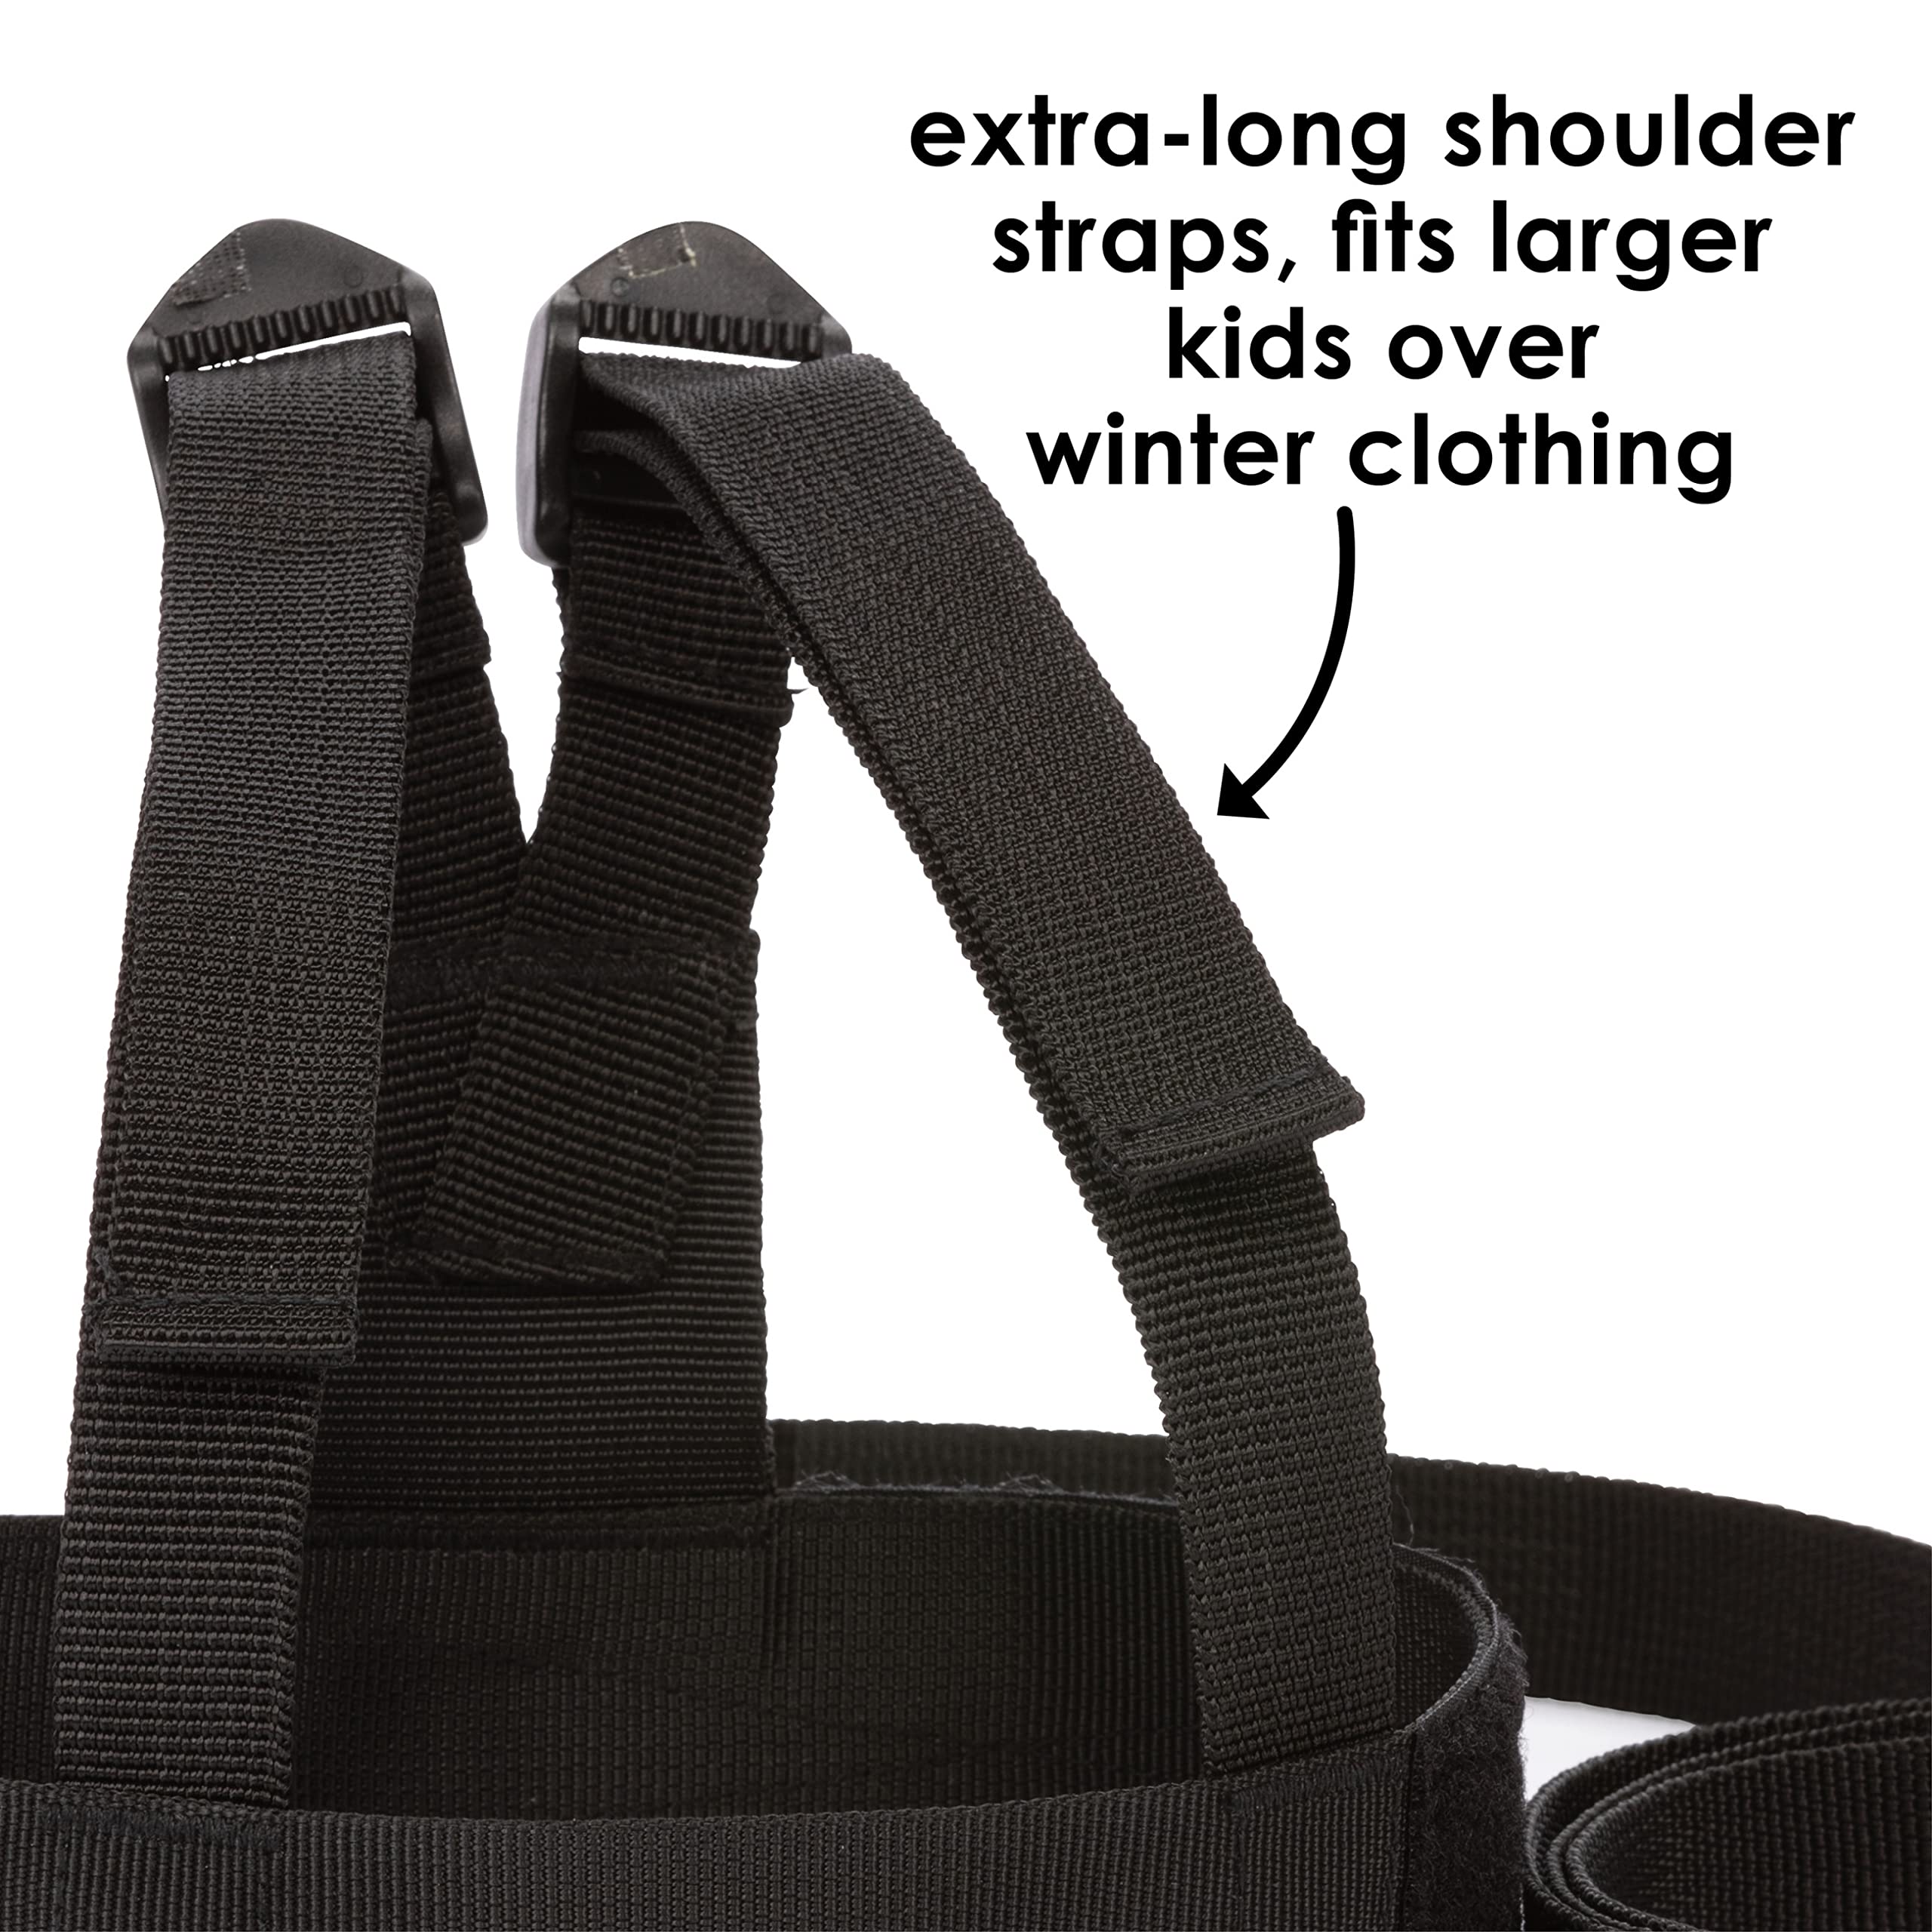 Diono Sure Steps Toddler Leash & Harness for Child Safety, with Shoulder Straps for Child Comfort